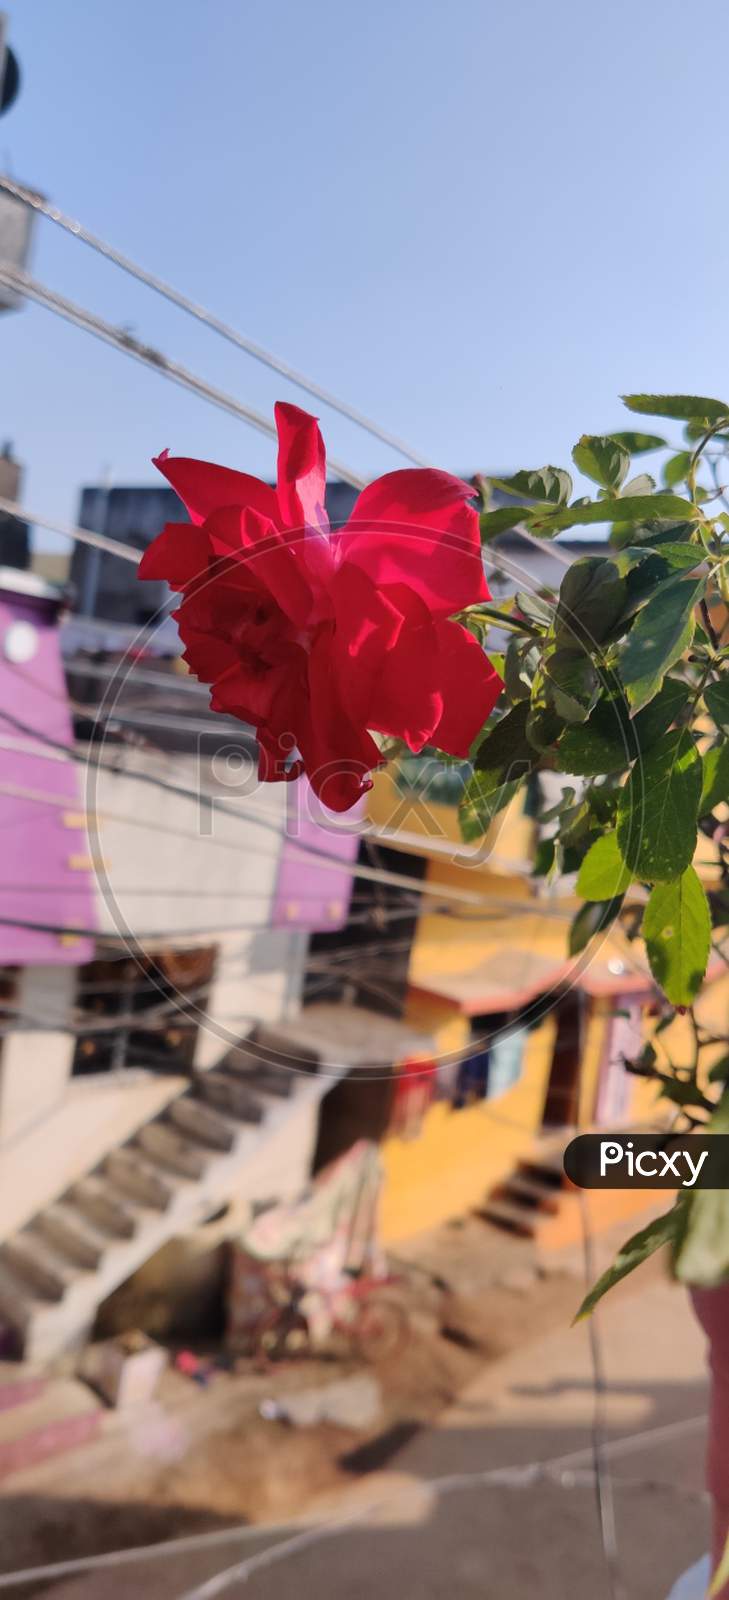 Indian Red Rose Flower Blown In Summer Morning Natural Beauty